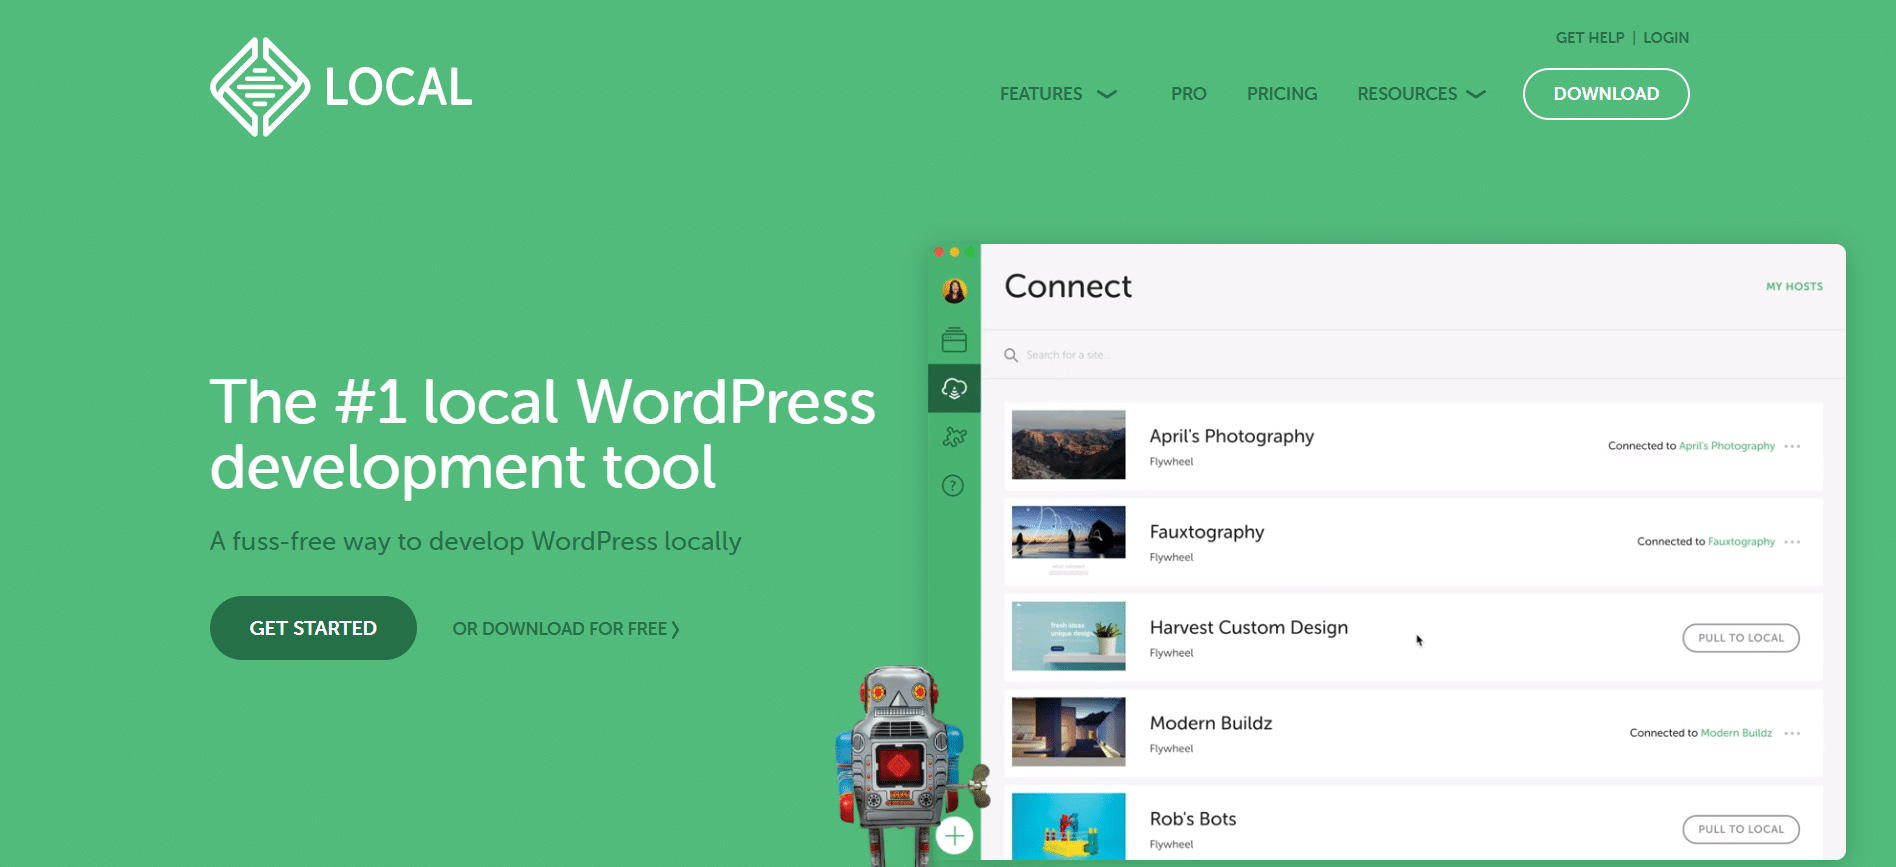 localwp by flywheel - best local development tools available for wordpress